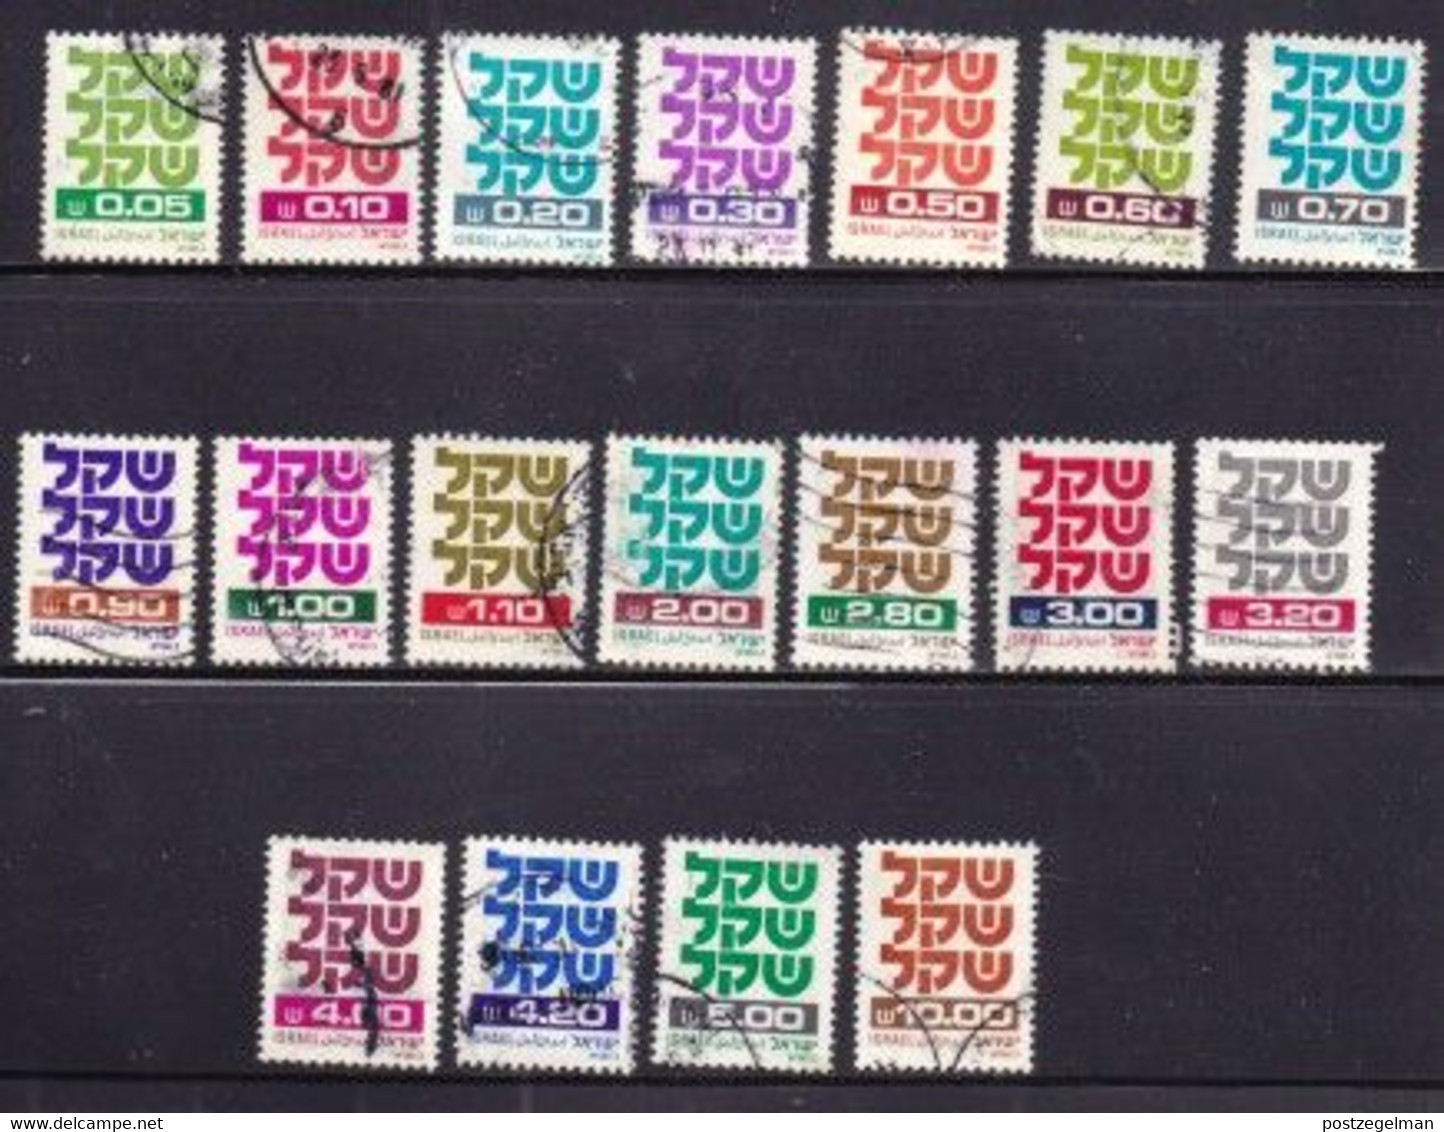 ISRAEL, 1980, Used Stamp(s)  Without  Tab, Shekel, SG Number(s) 784-802a, Scannr. 19206, 18 Values Only - Oblitérés (avec Tabs)